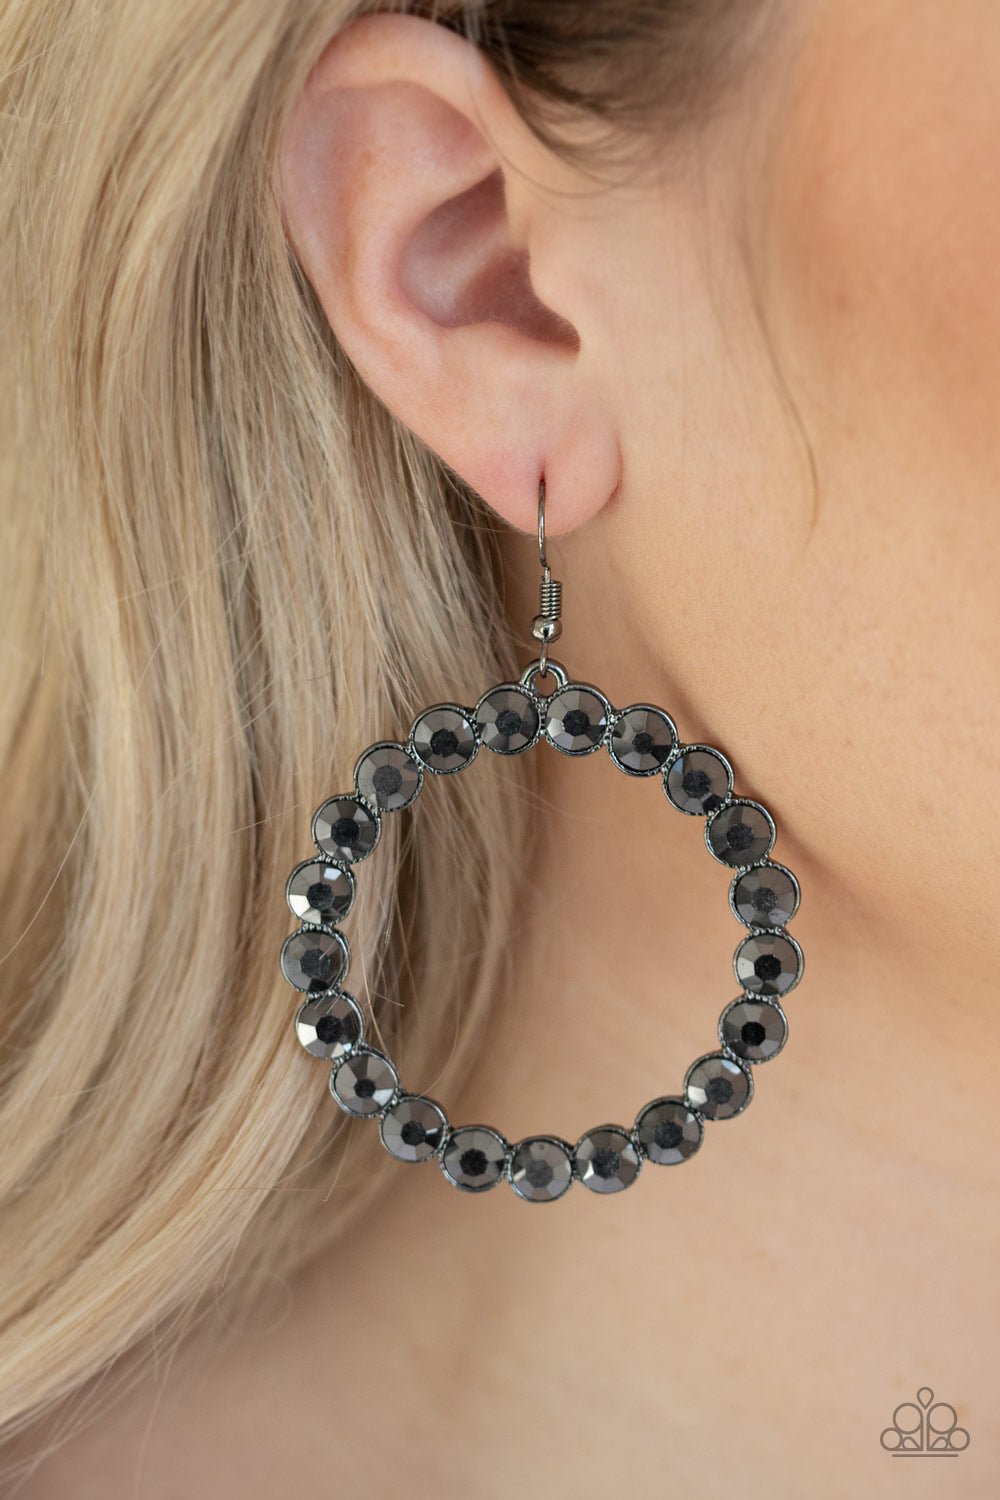 Welcome to the GLAM-boree Black
Earrings Paparazzi